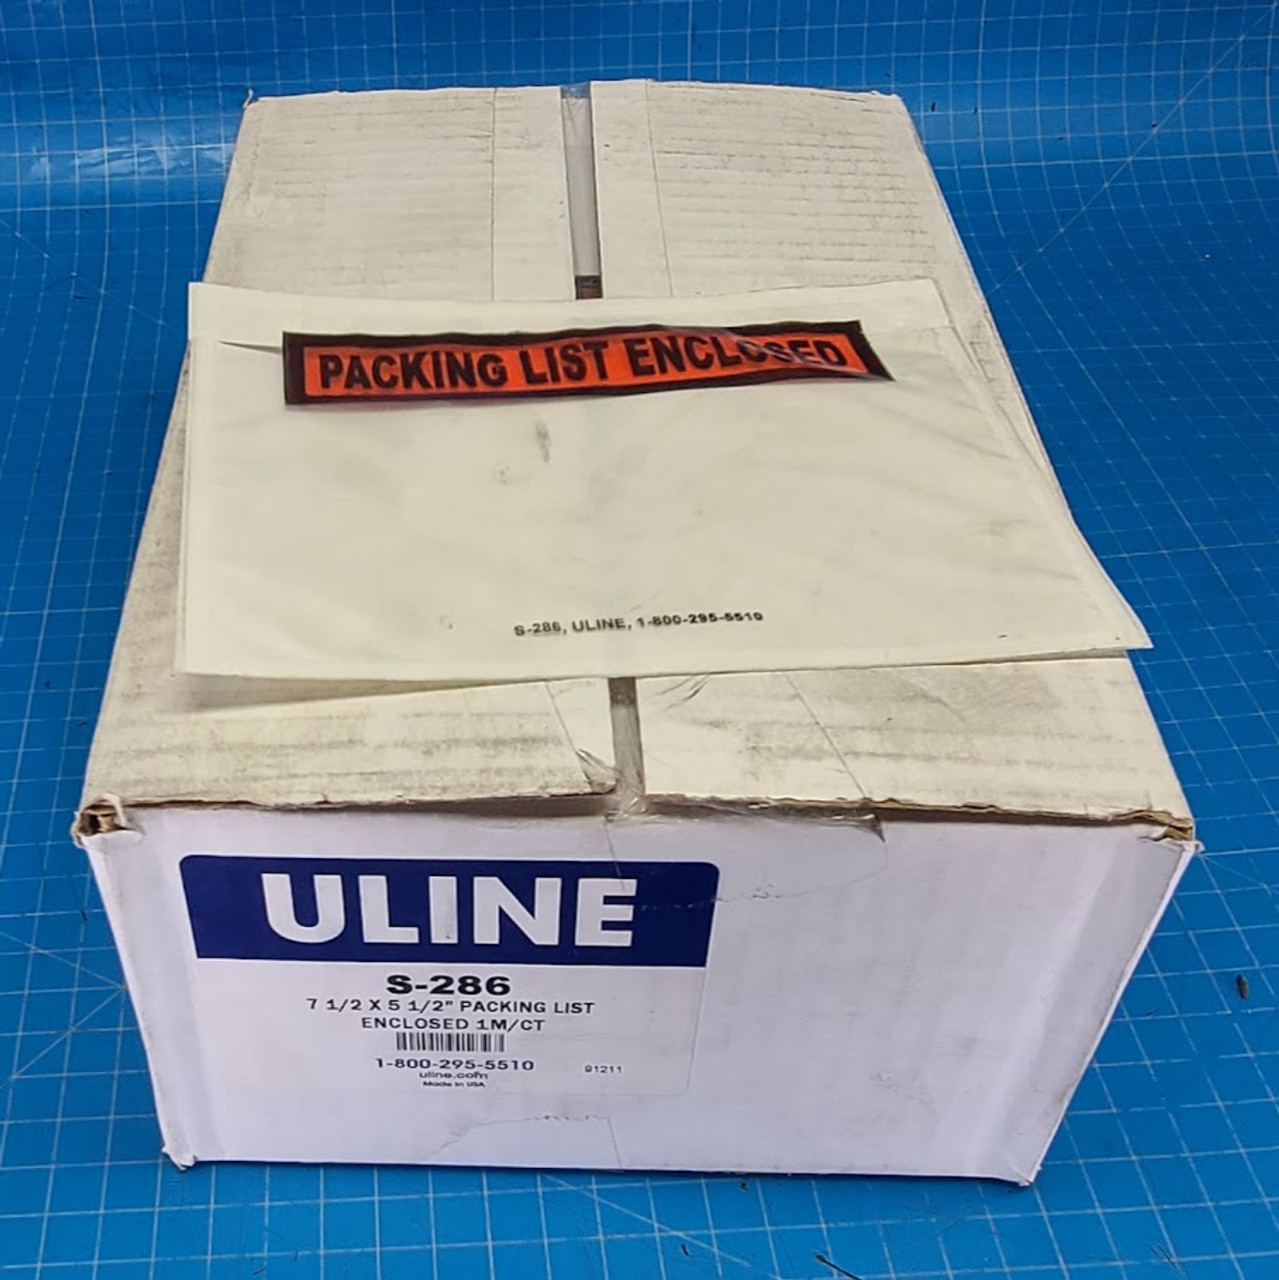 ULine 1000 count 7.5" x  5.5" Packing List Pouch S-286